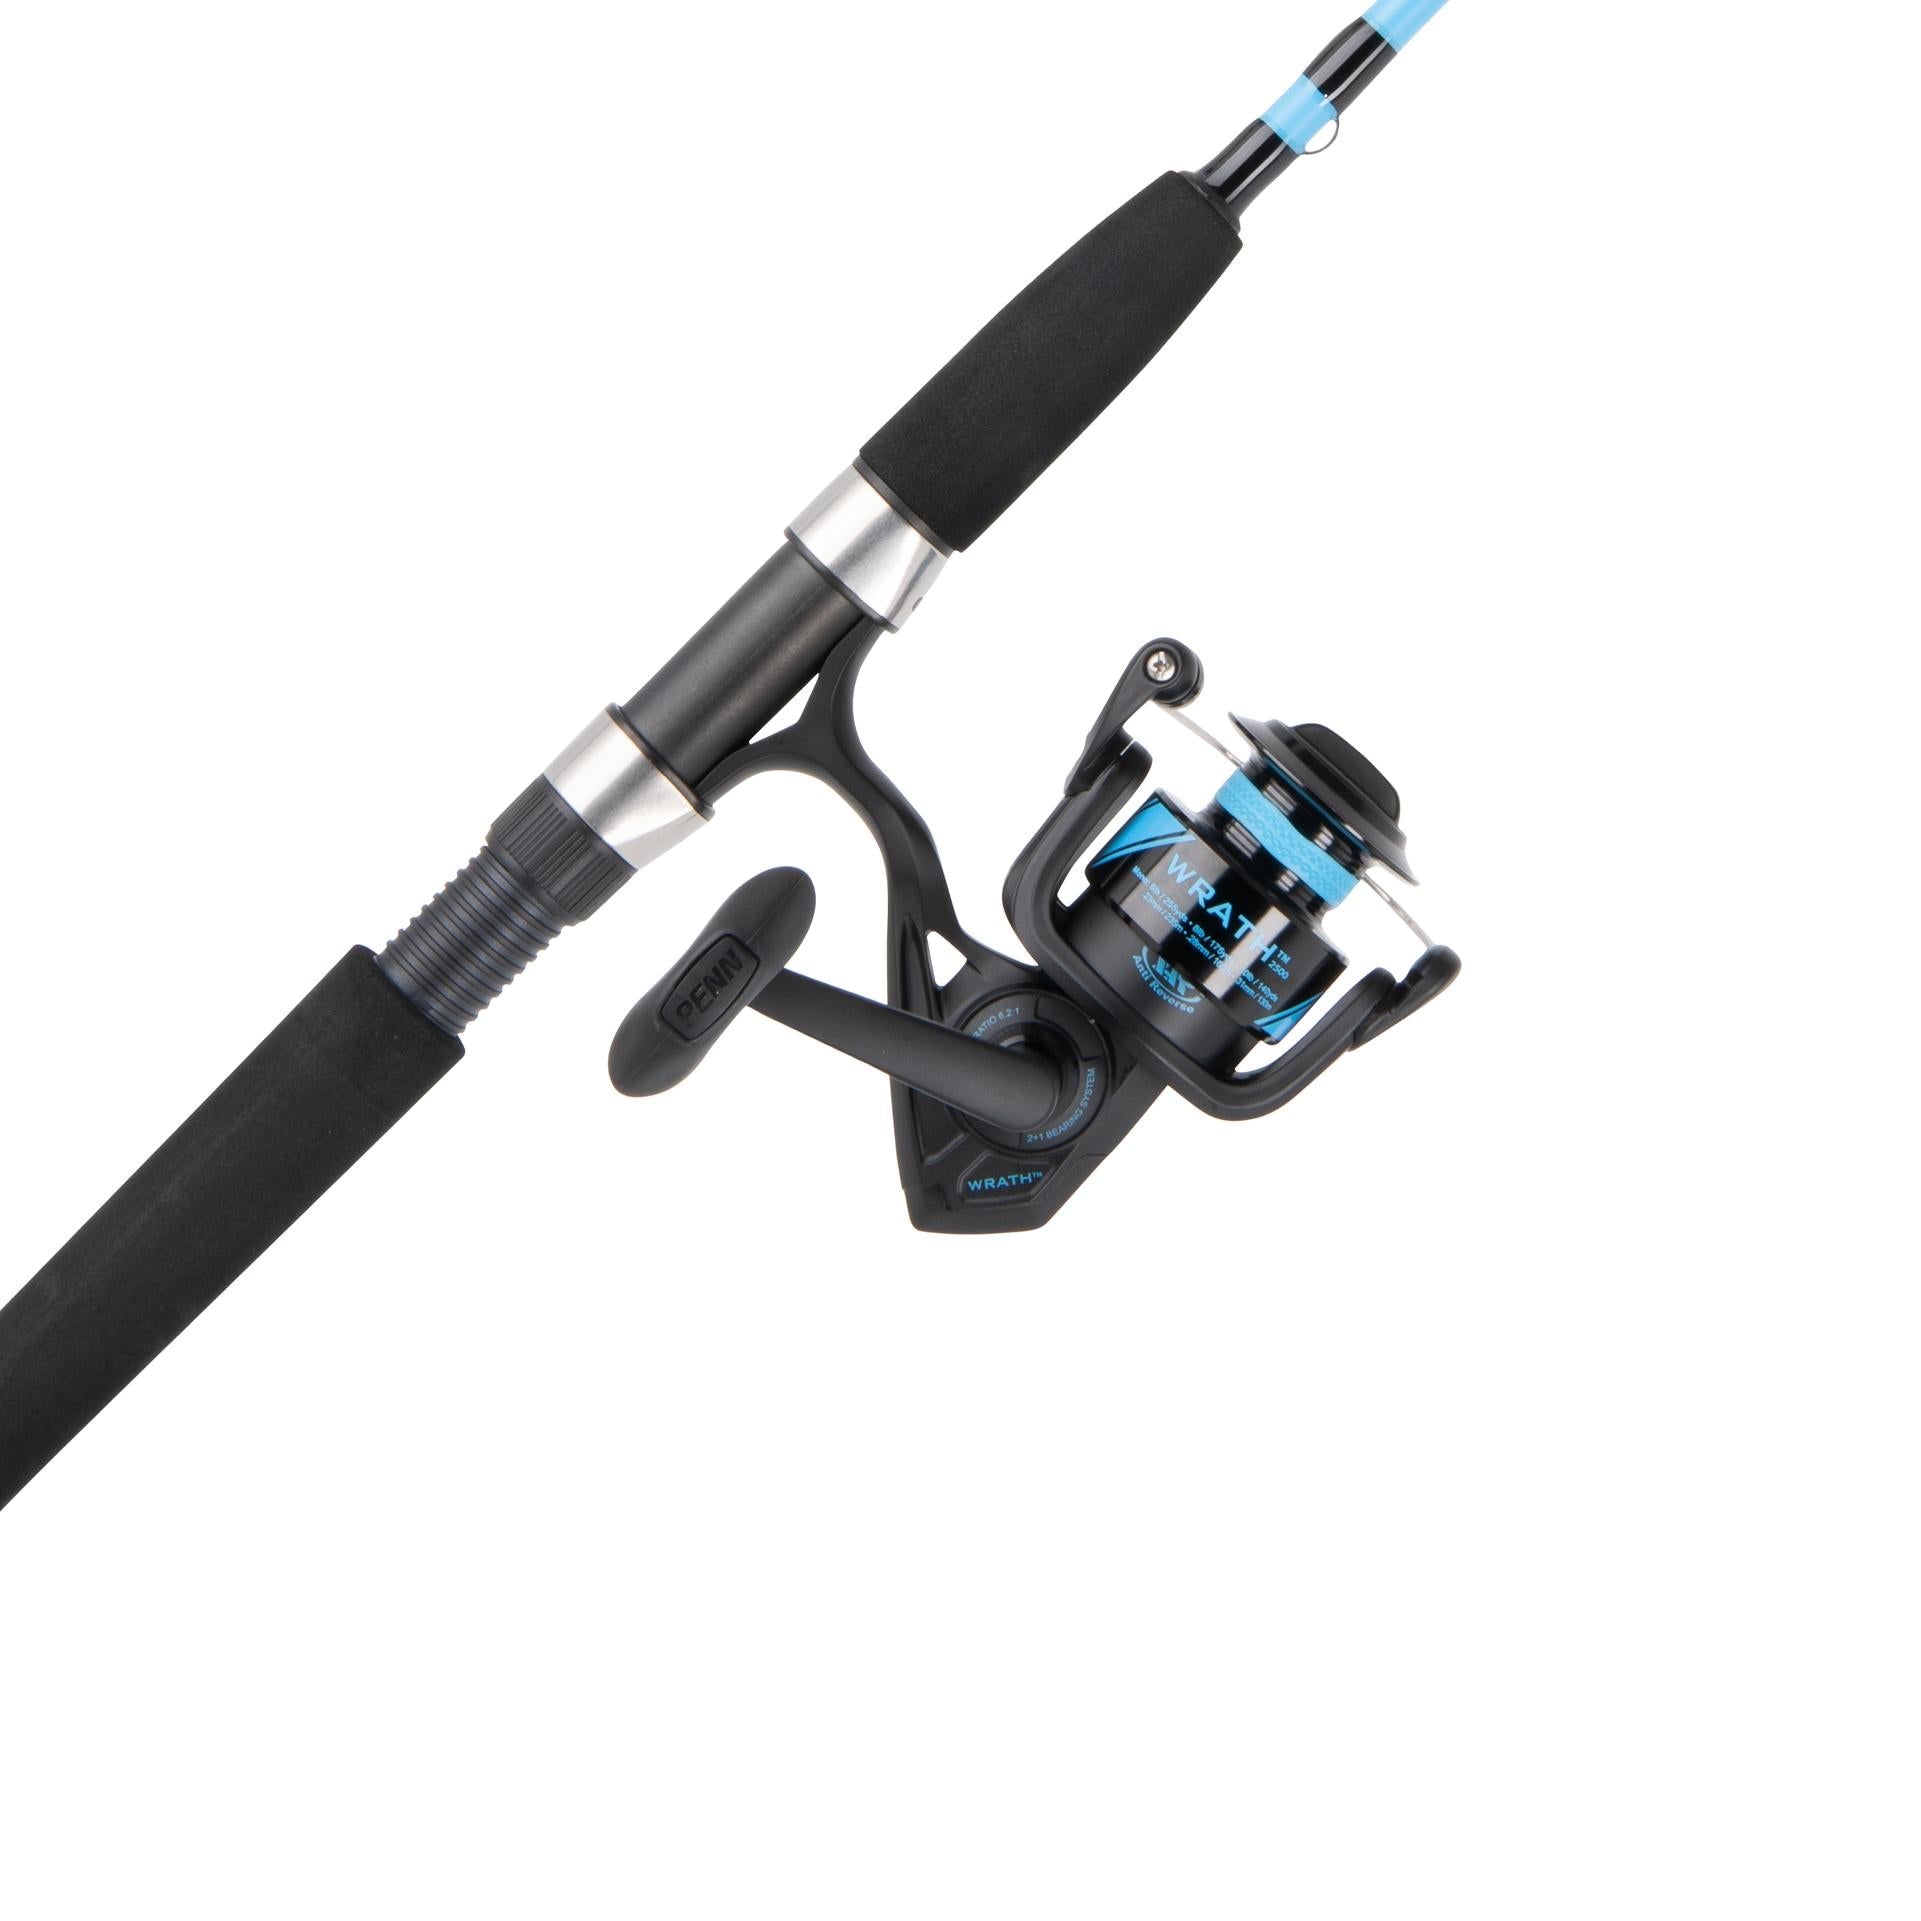 Buy the 3pc Set of Assorted Fishing Rods